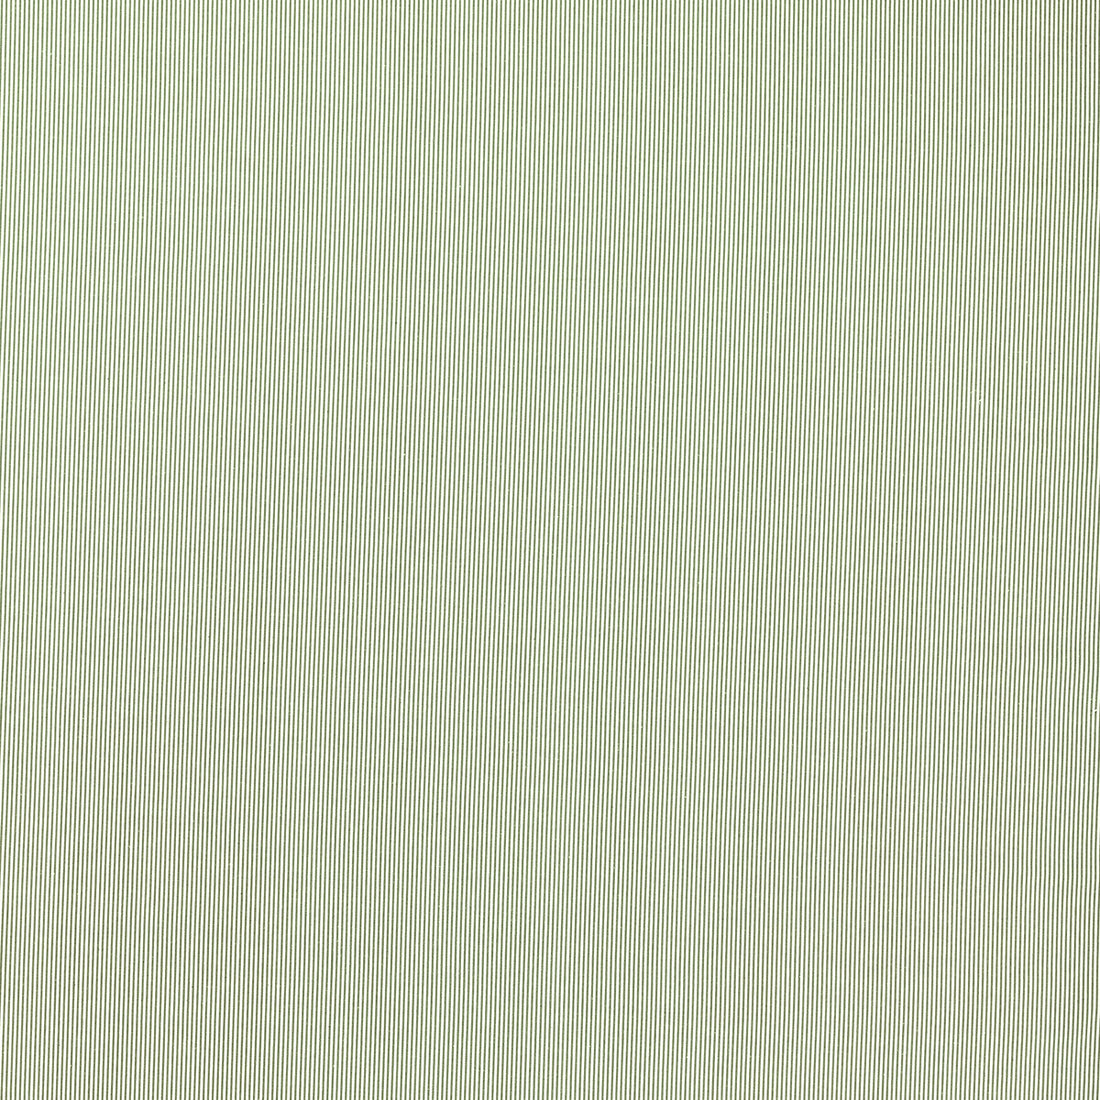 Breton fabric in sage color - pattern F1498/08.CAC.0 - by Clarke And Clarke in the Clarke &amp; Clarke Edgeworth collection